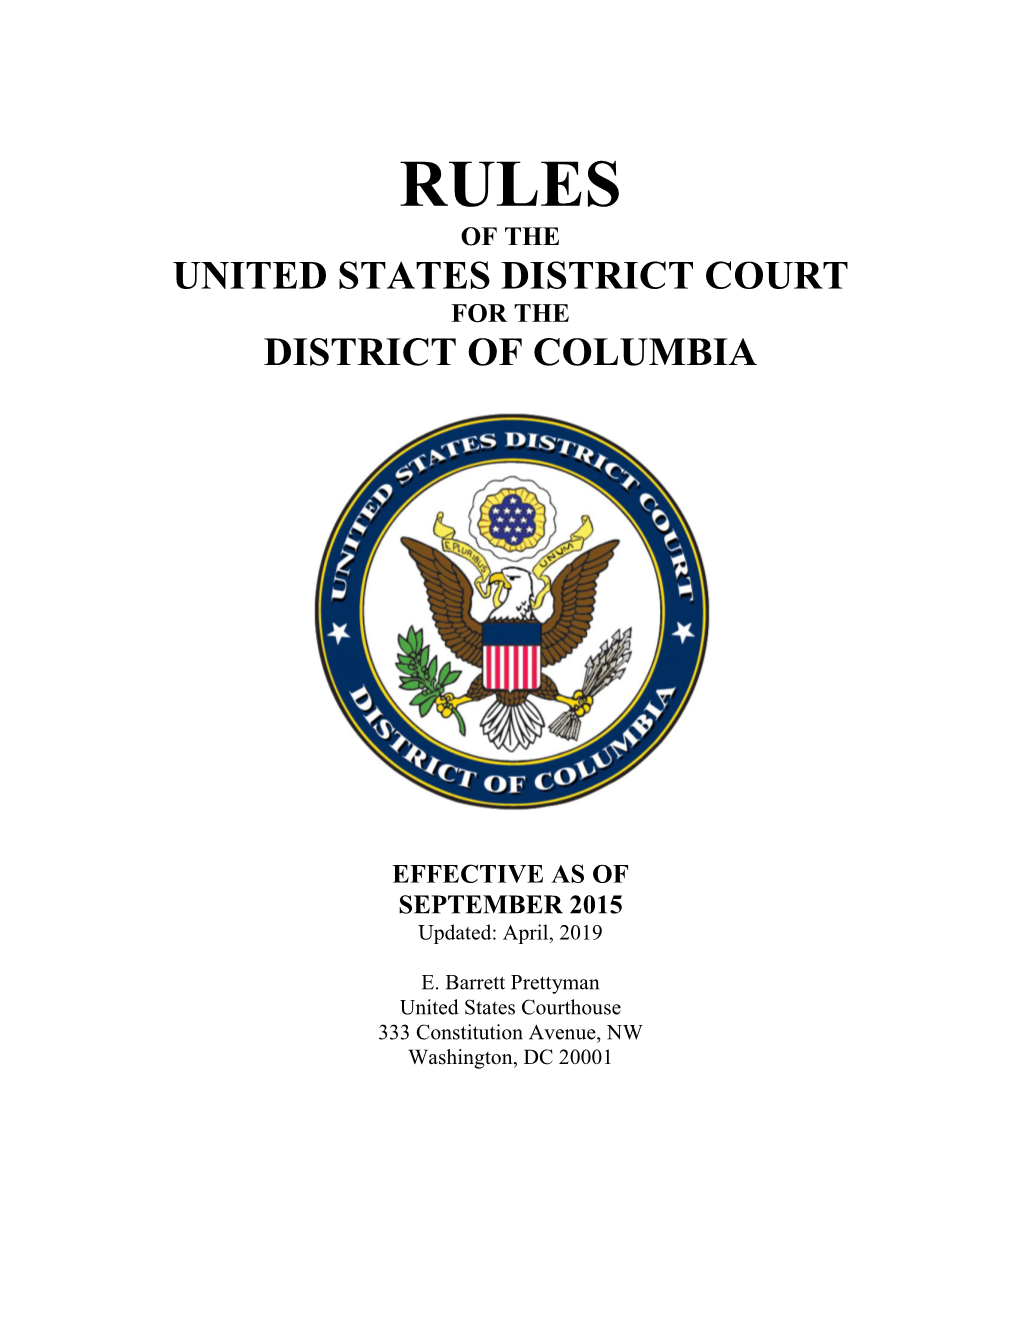 Rules of the United States District Court for the District of Columbia